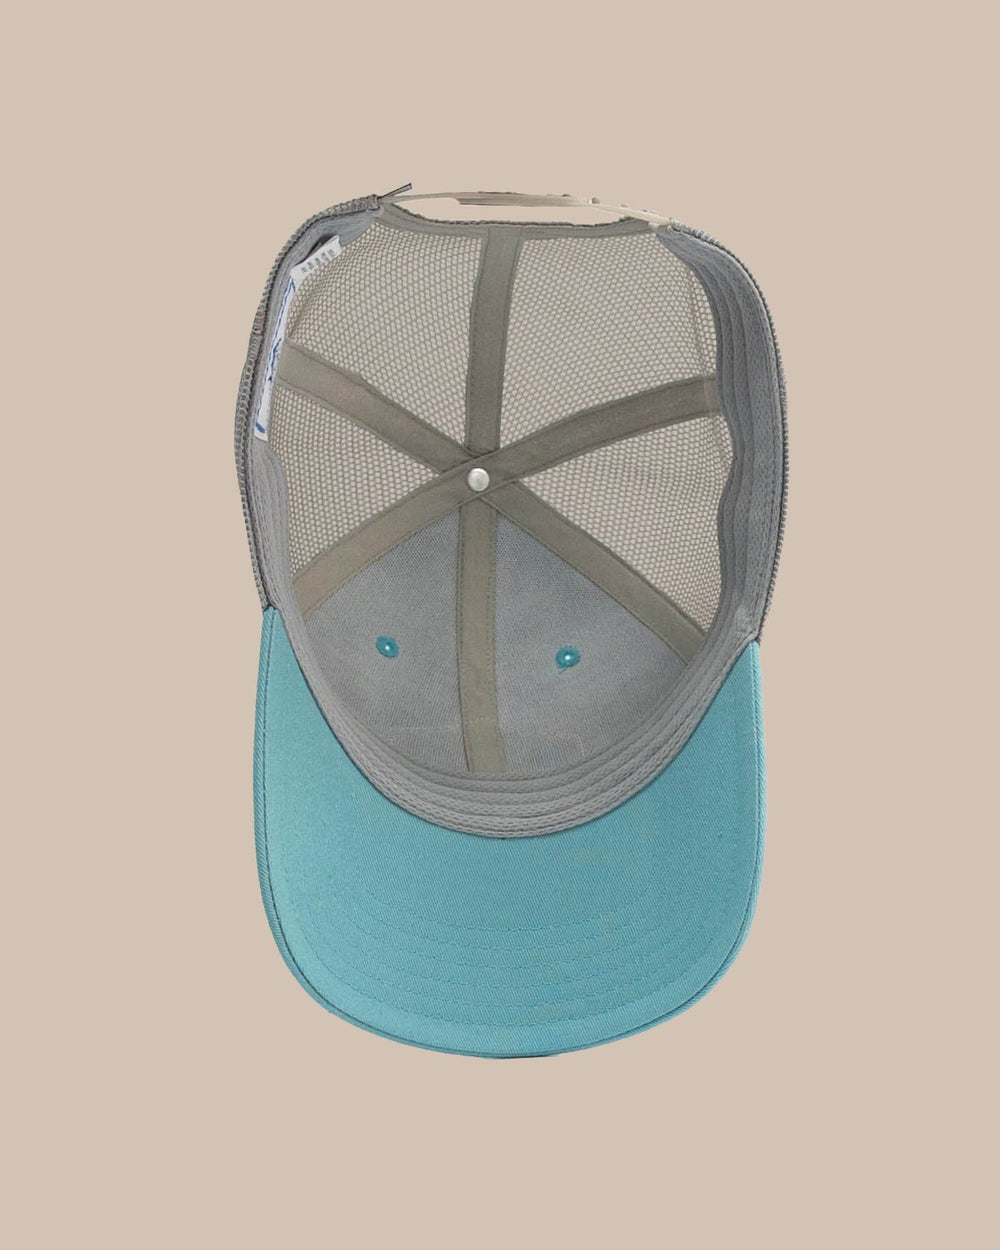 The detail view of the Southern Tide Skipjack Trademark Trucker Hat by Southern Tide - Blue